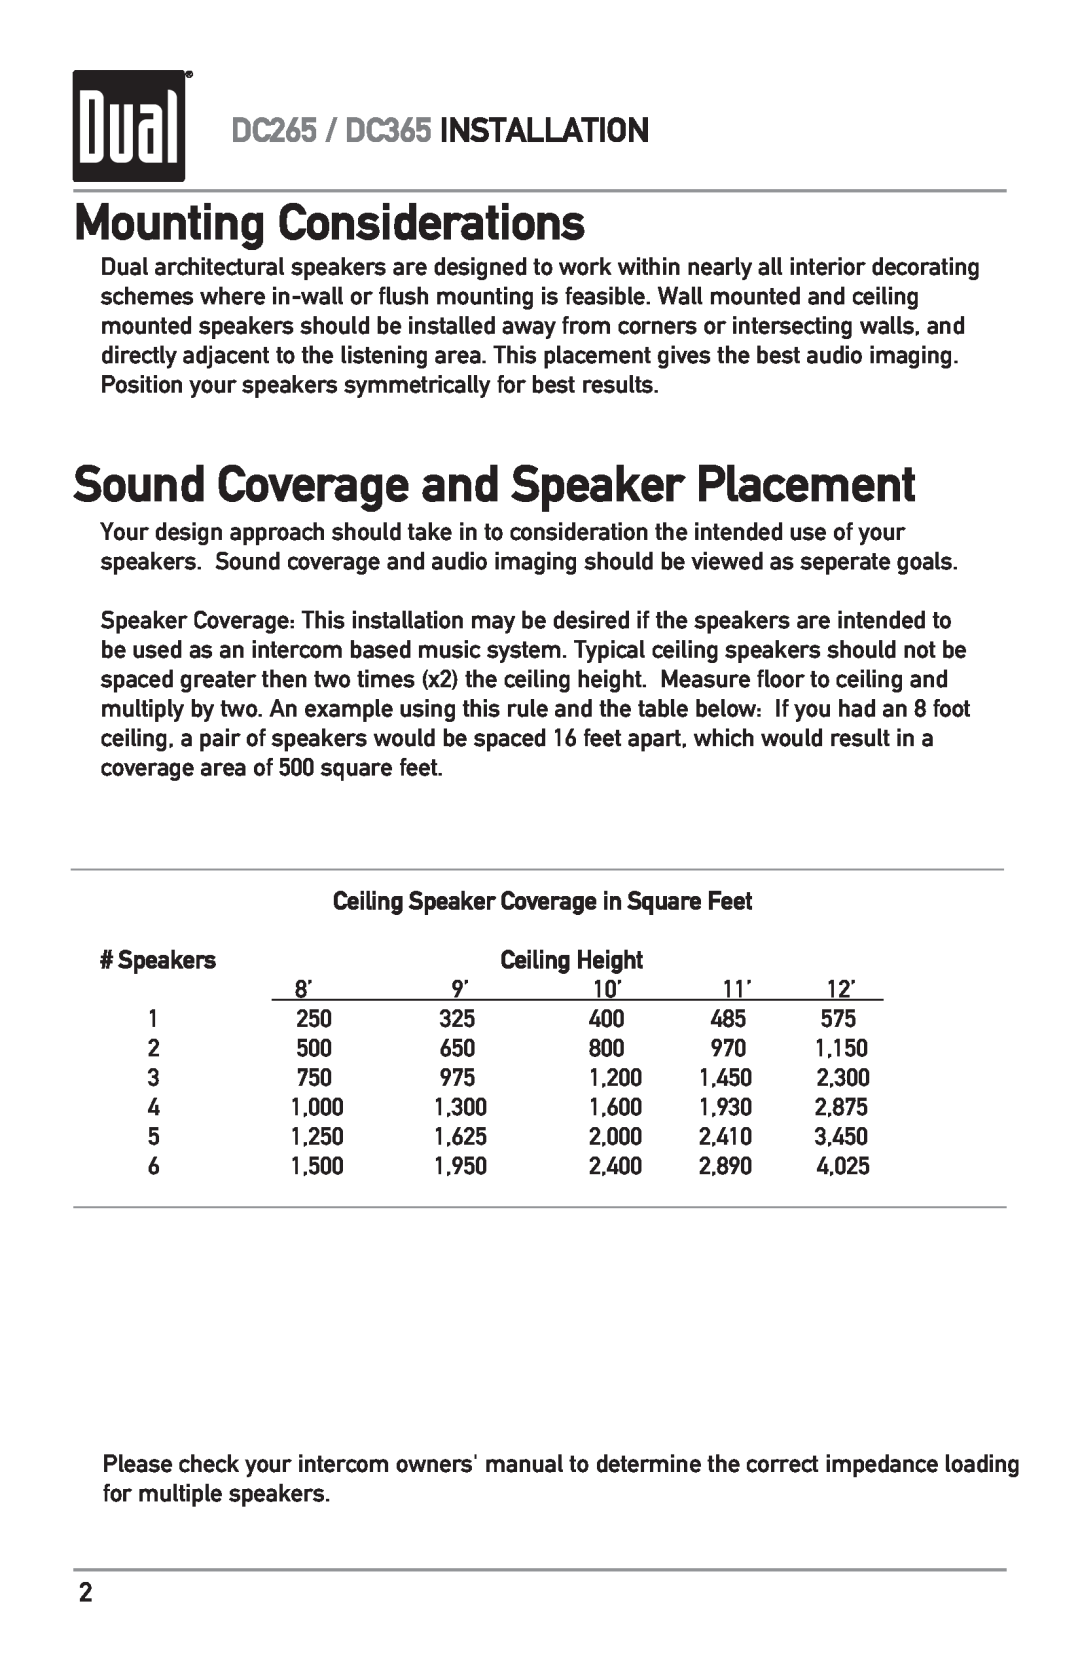 Dual owner manual Mounting Considerations, Sound Coverage and Speaker Placement, DC265 / DC365 INSTALLATION, # Speakers 